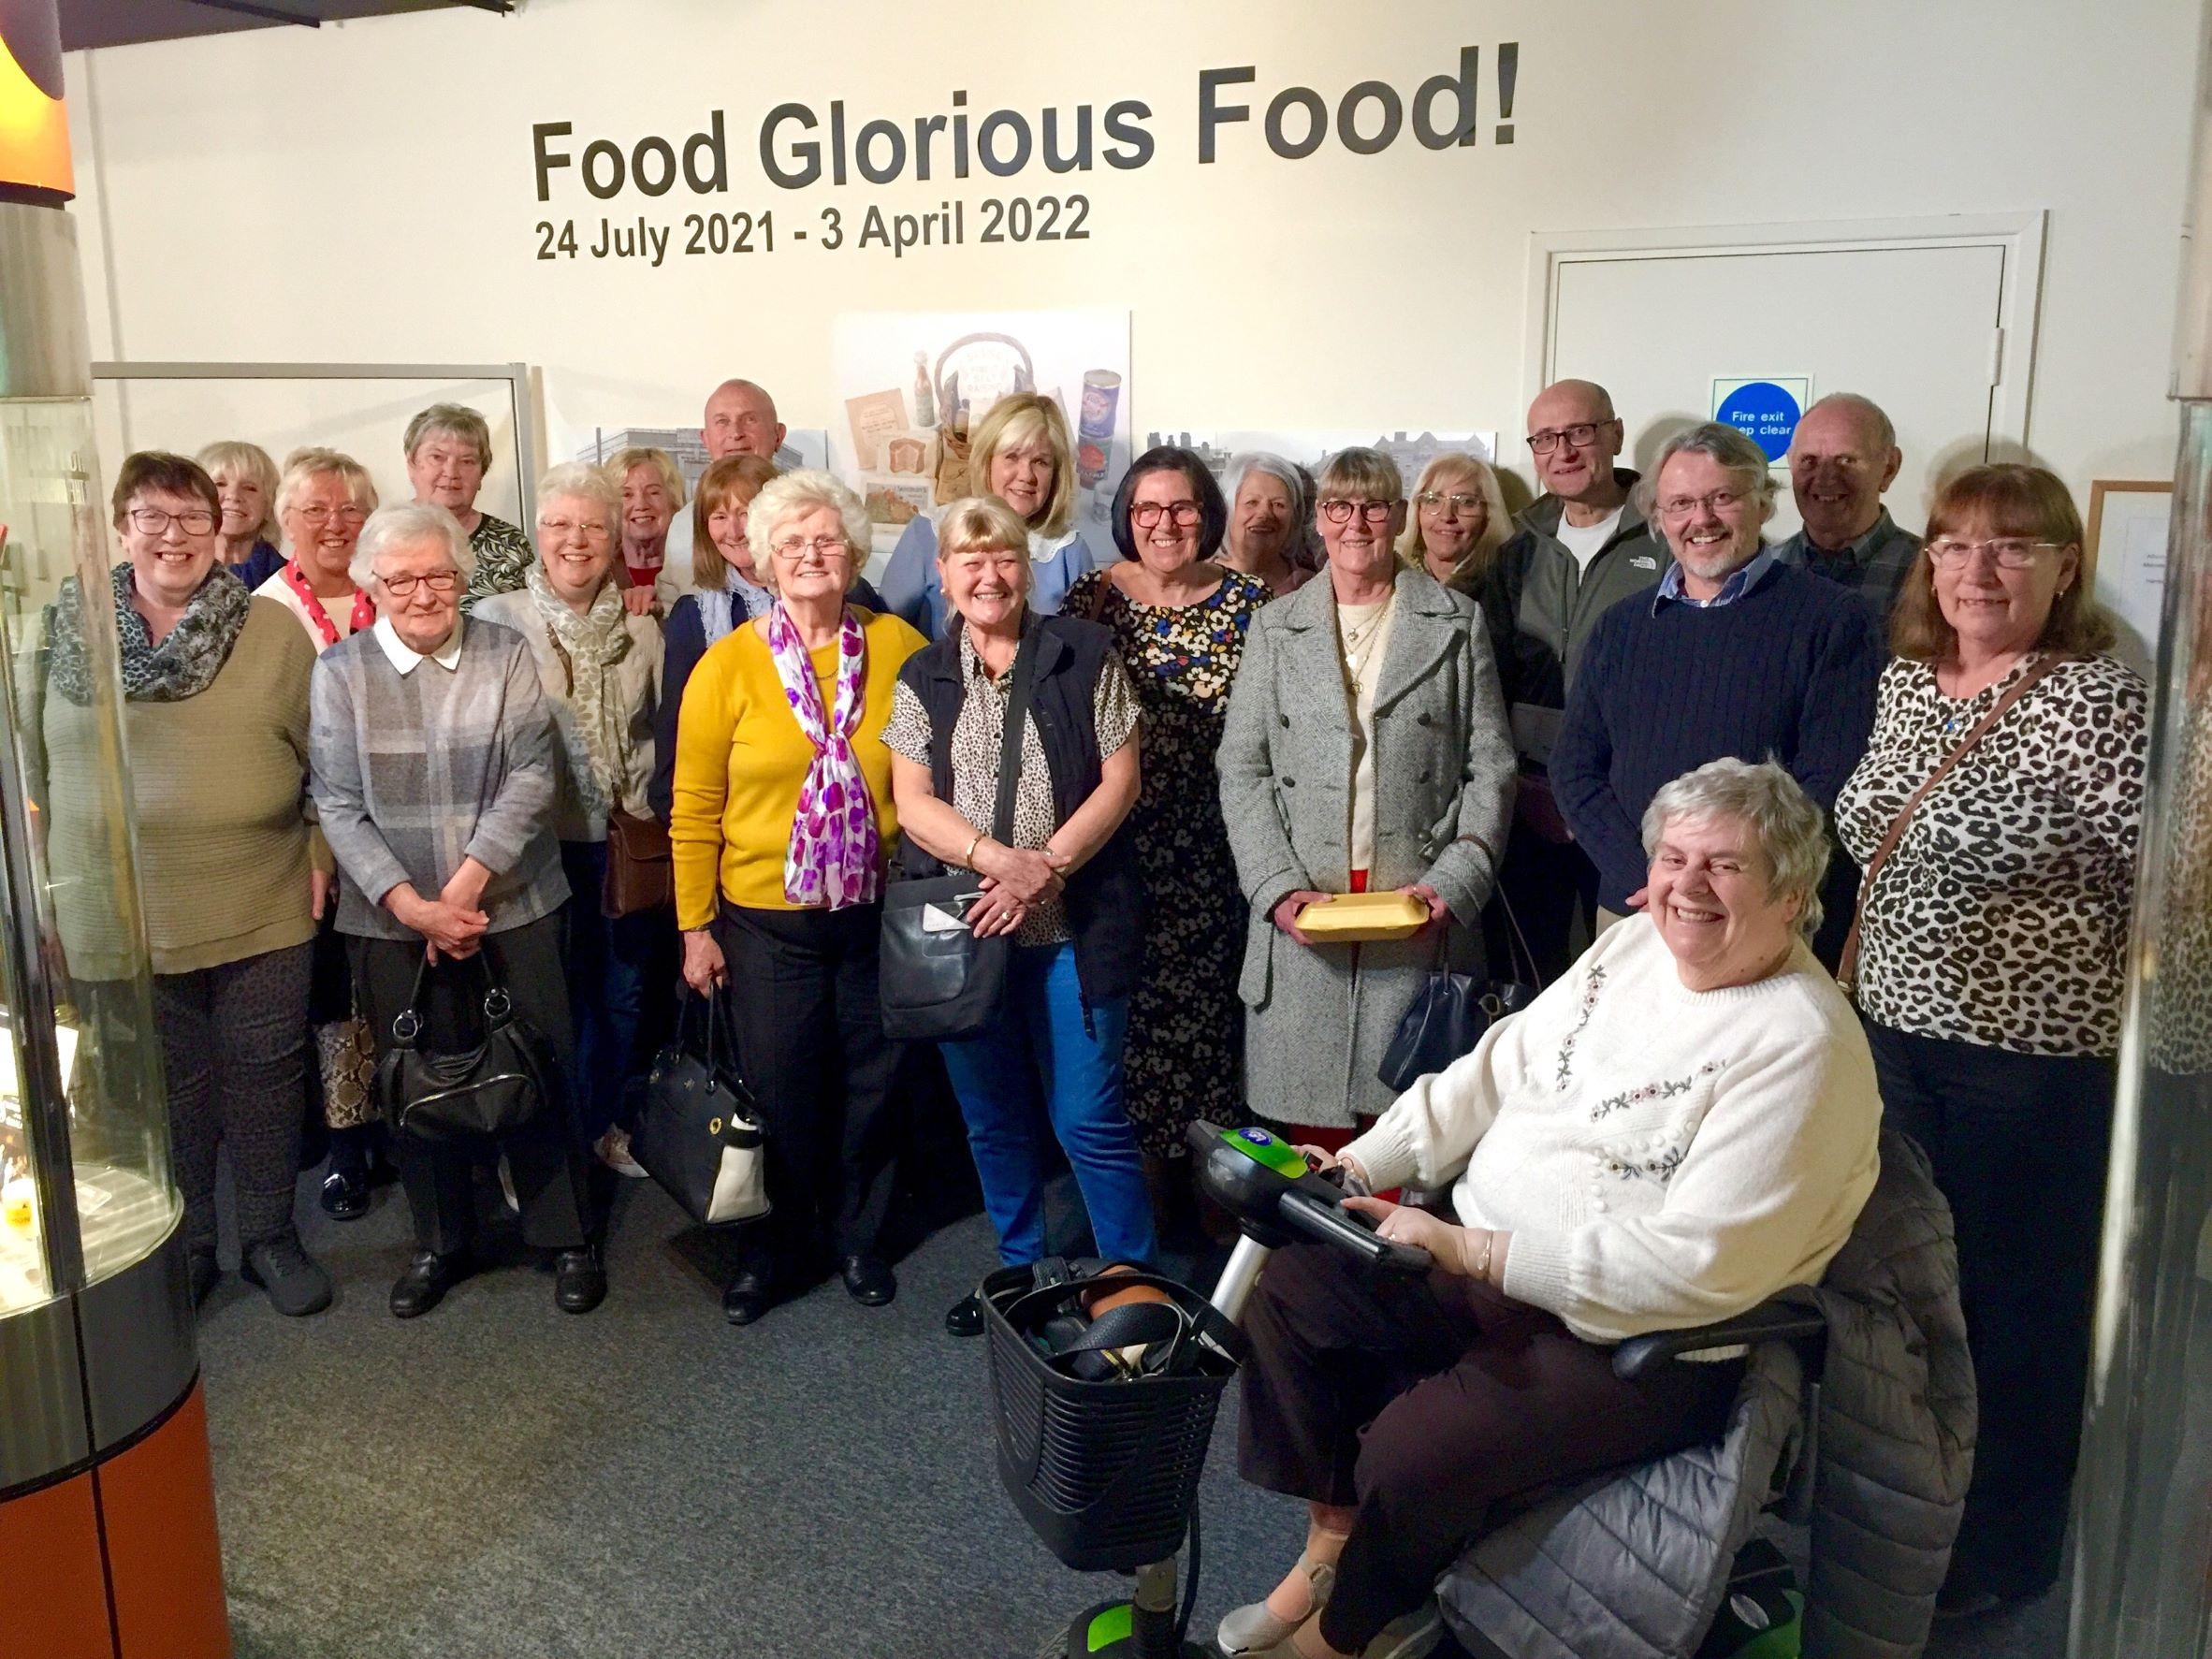 The Sainsbury's Veterans visiting the Food Glorious Food exhibition